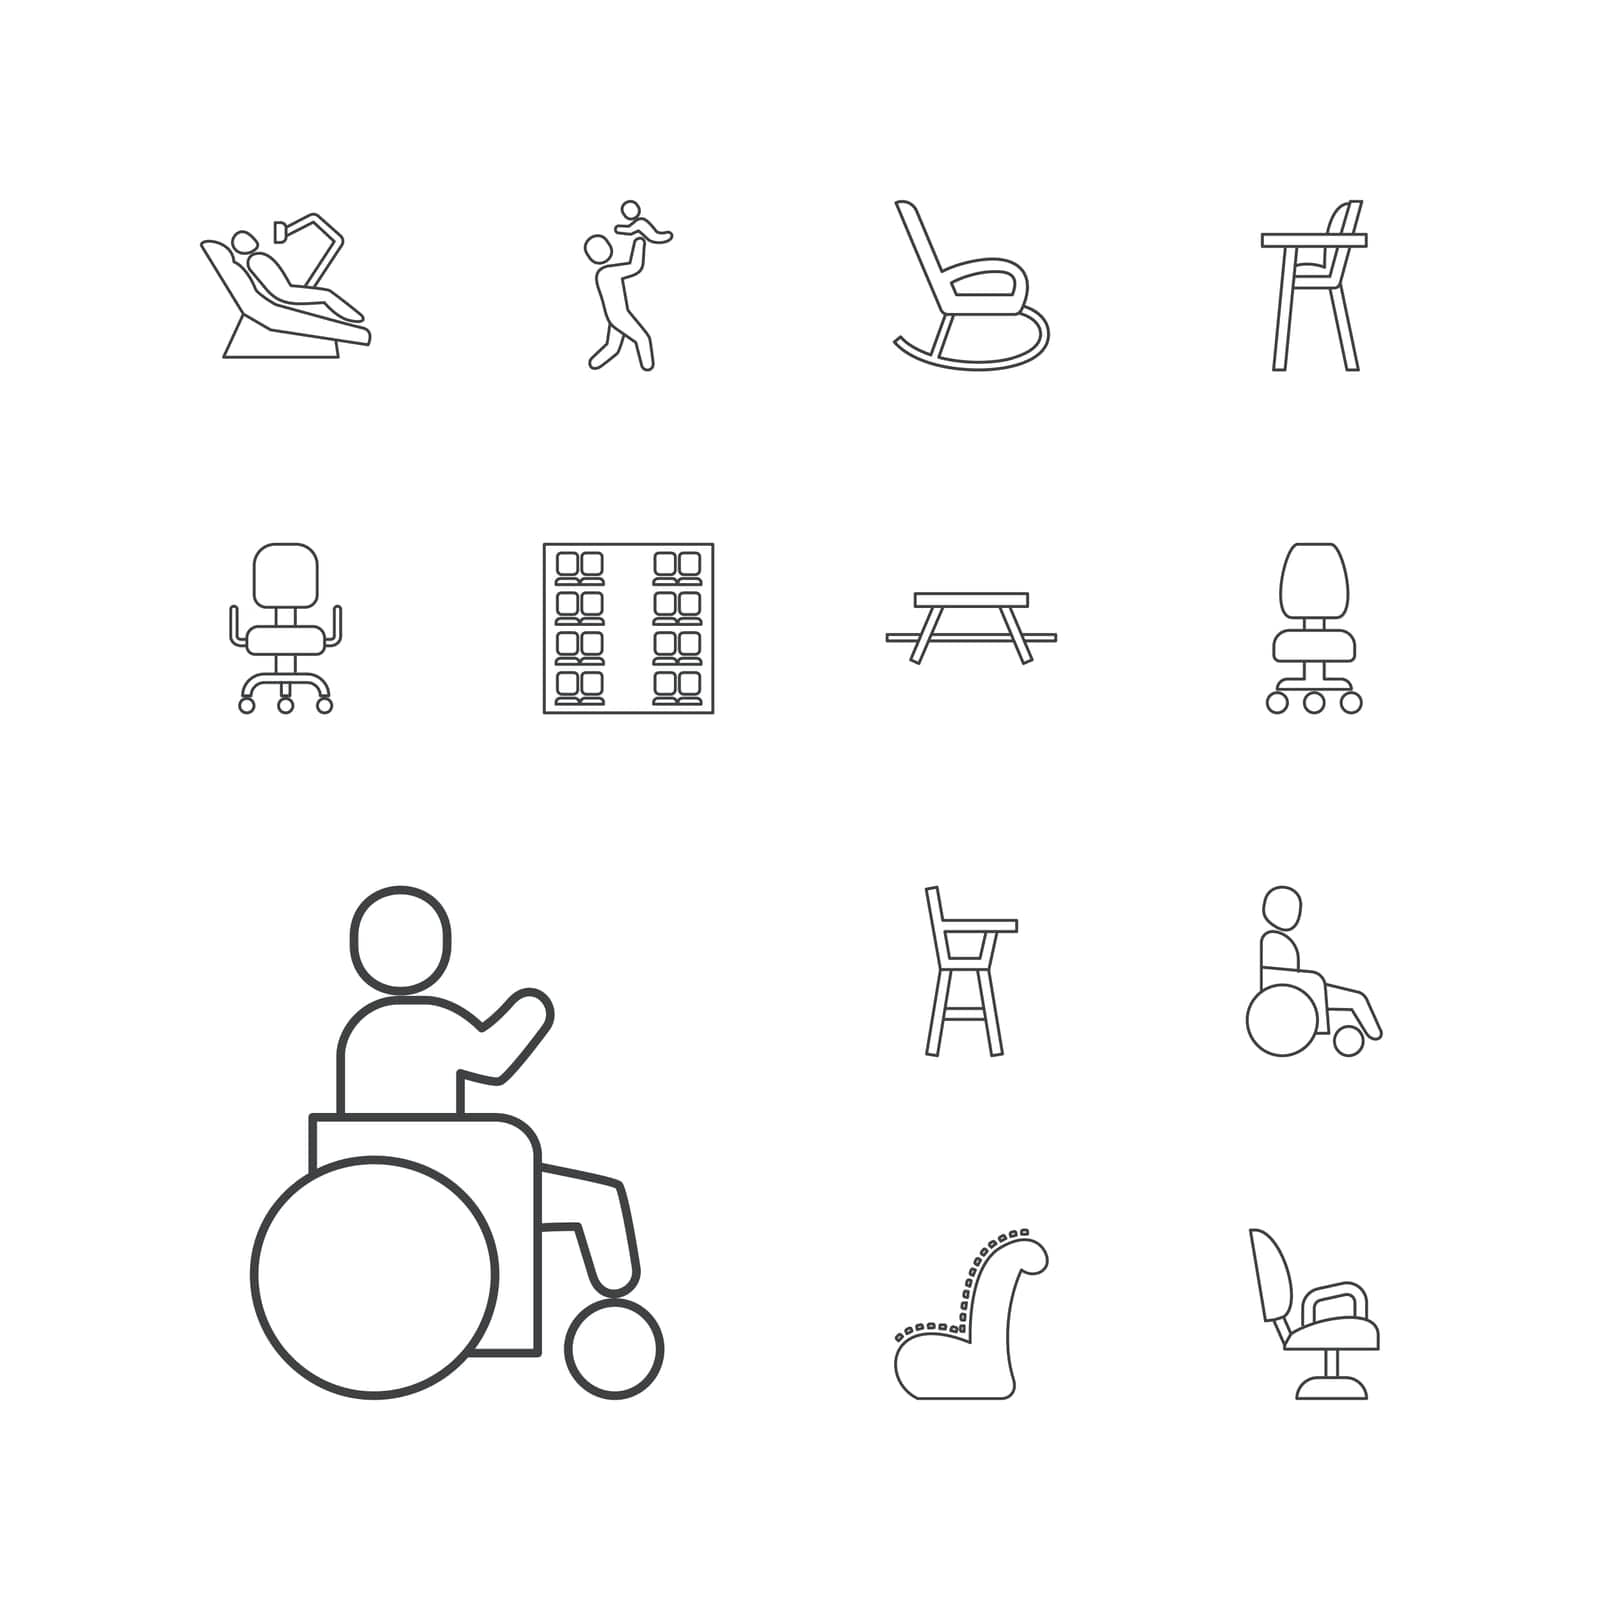 plane,symbol,father,icon,sign,isolated,rocking,office,seats,interior,white,modern,furniture,dental,armchair,flat,design,disabled,vector,man,barber,table,set,business,work,chair,black,eating,seat,outdoor,with,background,baby,style,illustration,object